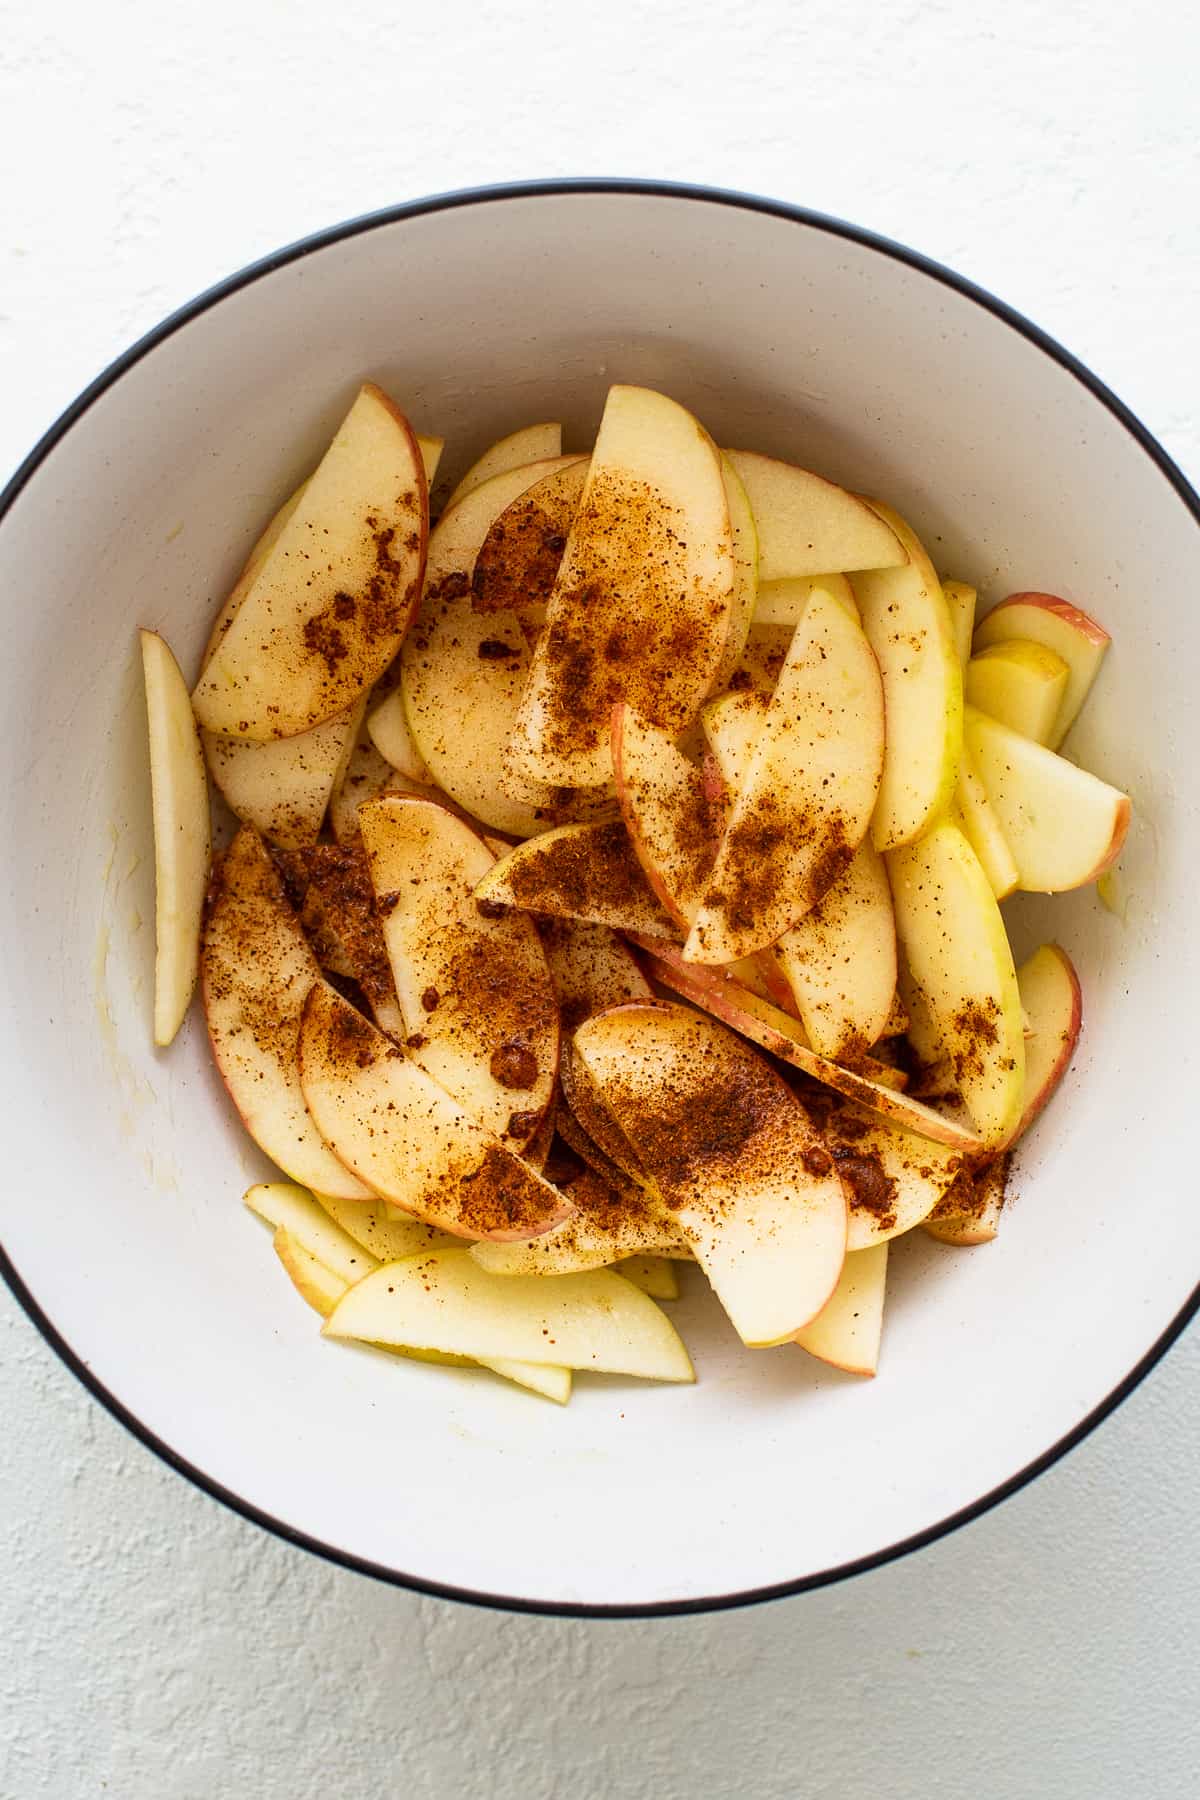 Apples and ،es in a bowl.